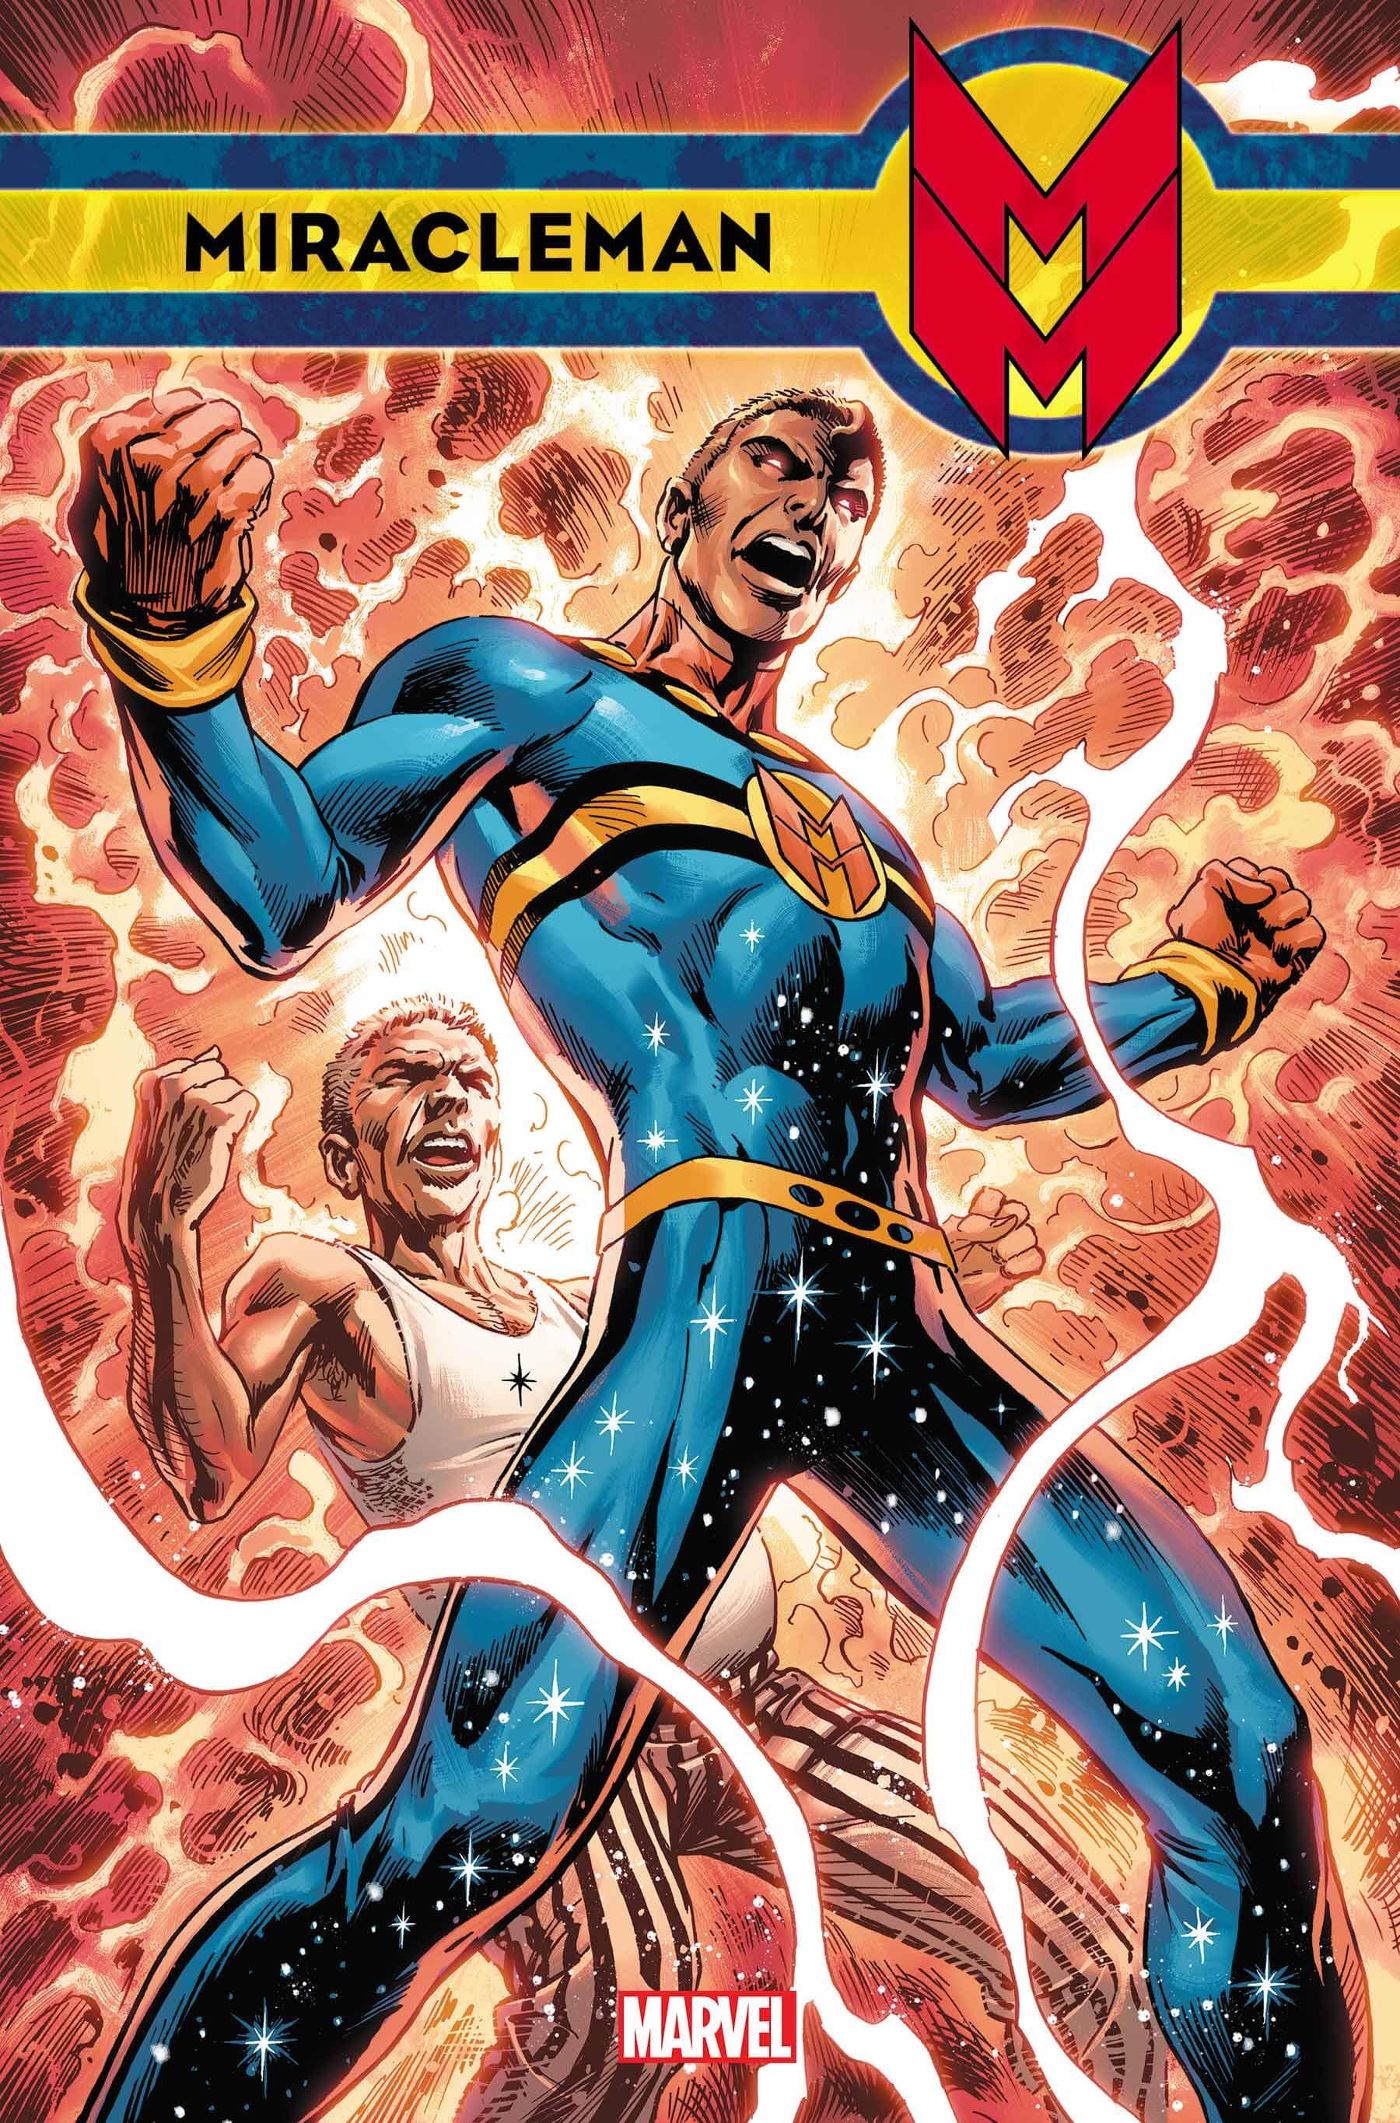 Marvel-Miracleman-cover